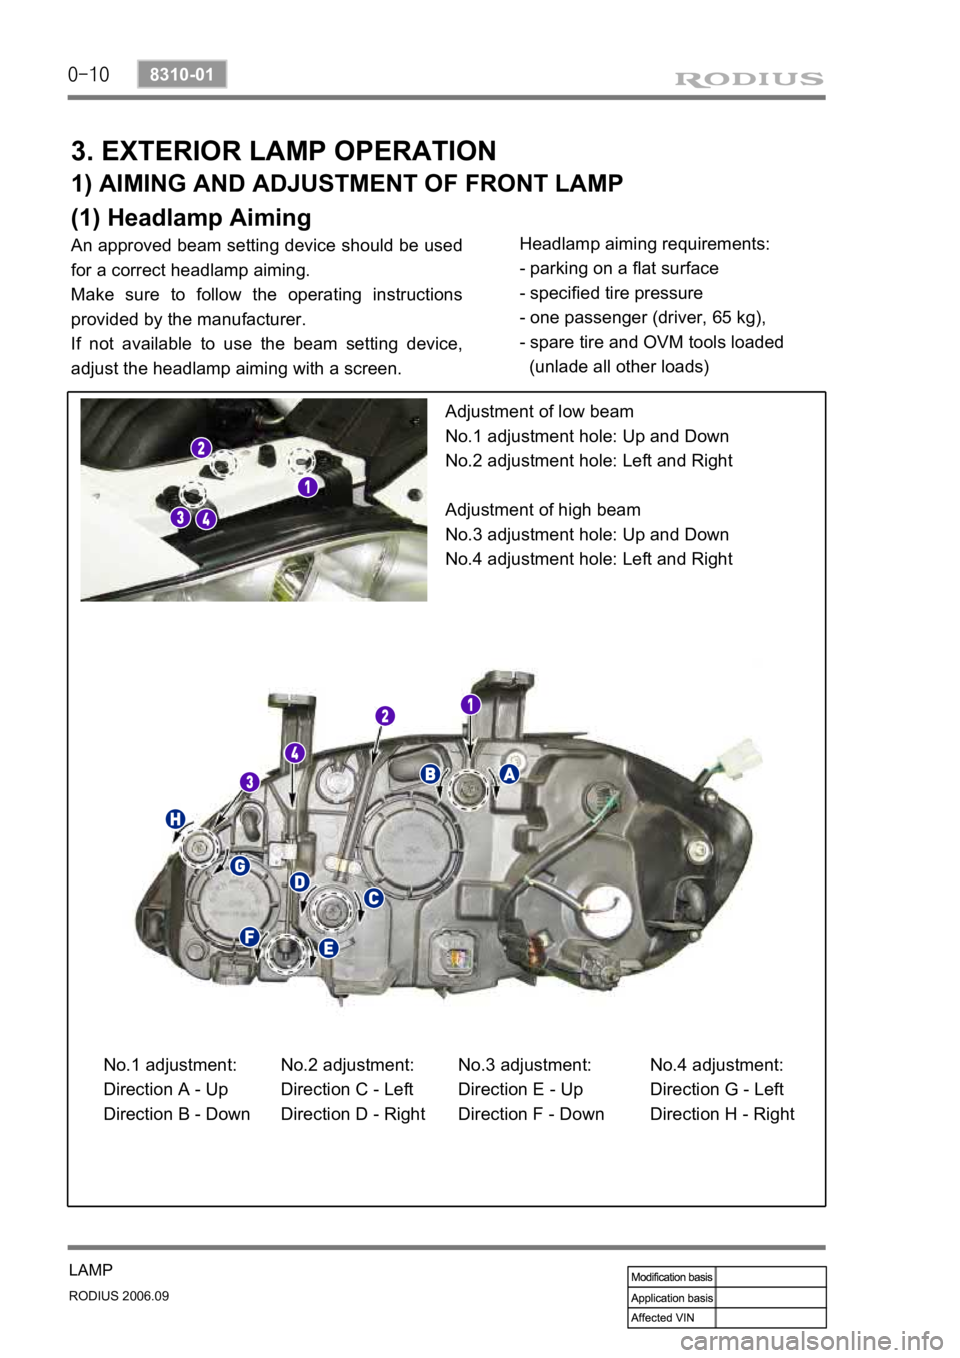 SSANGYONG RODIUS 2007  Service Manual 0-10
RODIUS 2006.09
8310-01
LAMP
3. EXTERIOR LAMP OPERATION
1) AIMING AND ADJUSTMENT OF FRONT LAMP 
(1) Headlamp Aiming
An approved beam setting device should be used  
for a correct headlamp aiming.
